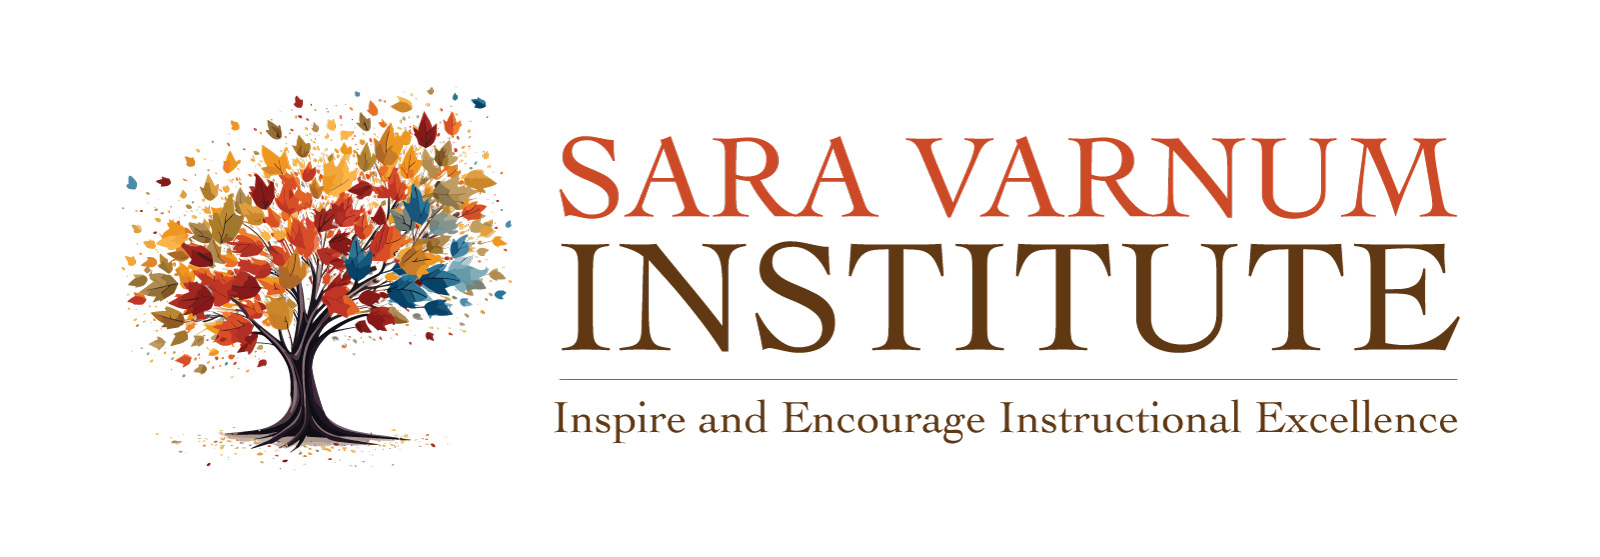 Sara Varnum Institute. Inspire and Encourage Instructional Excellence